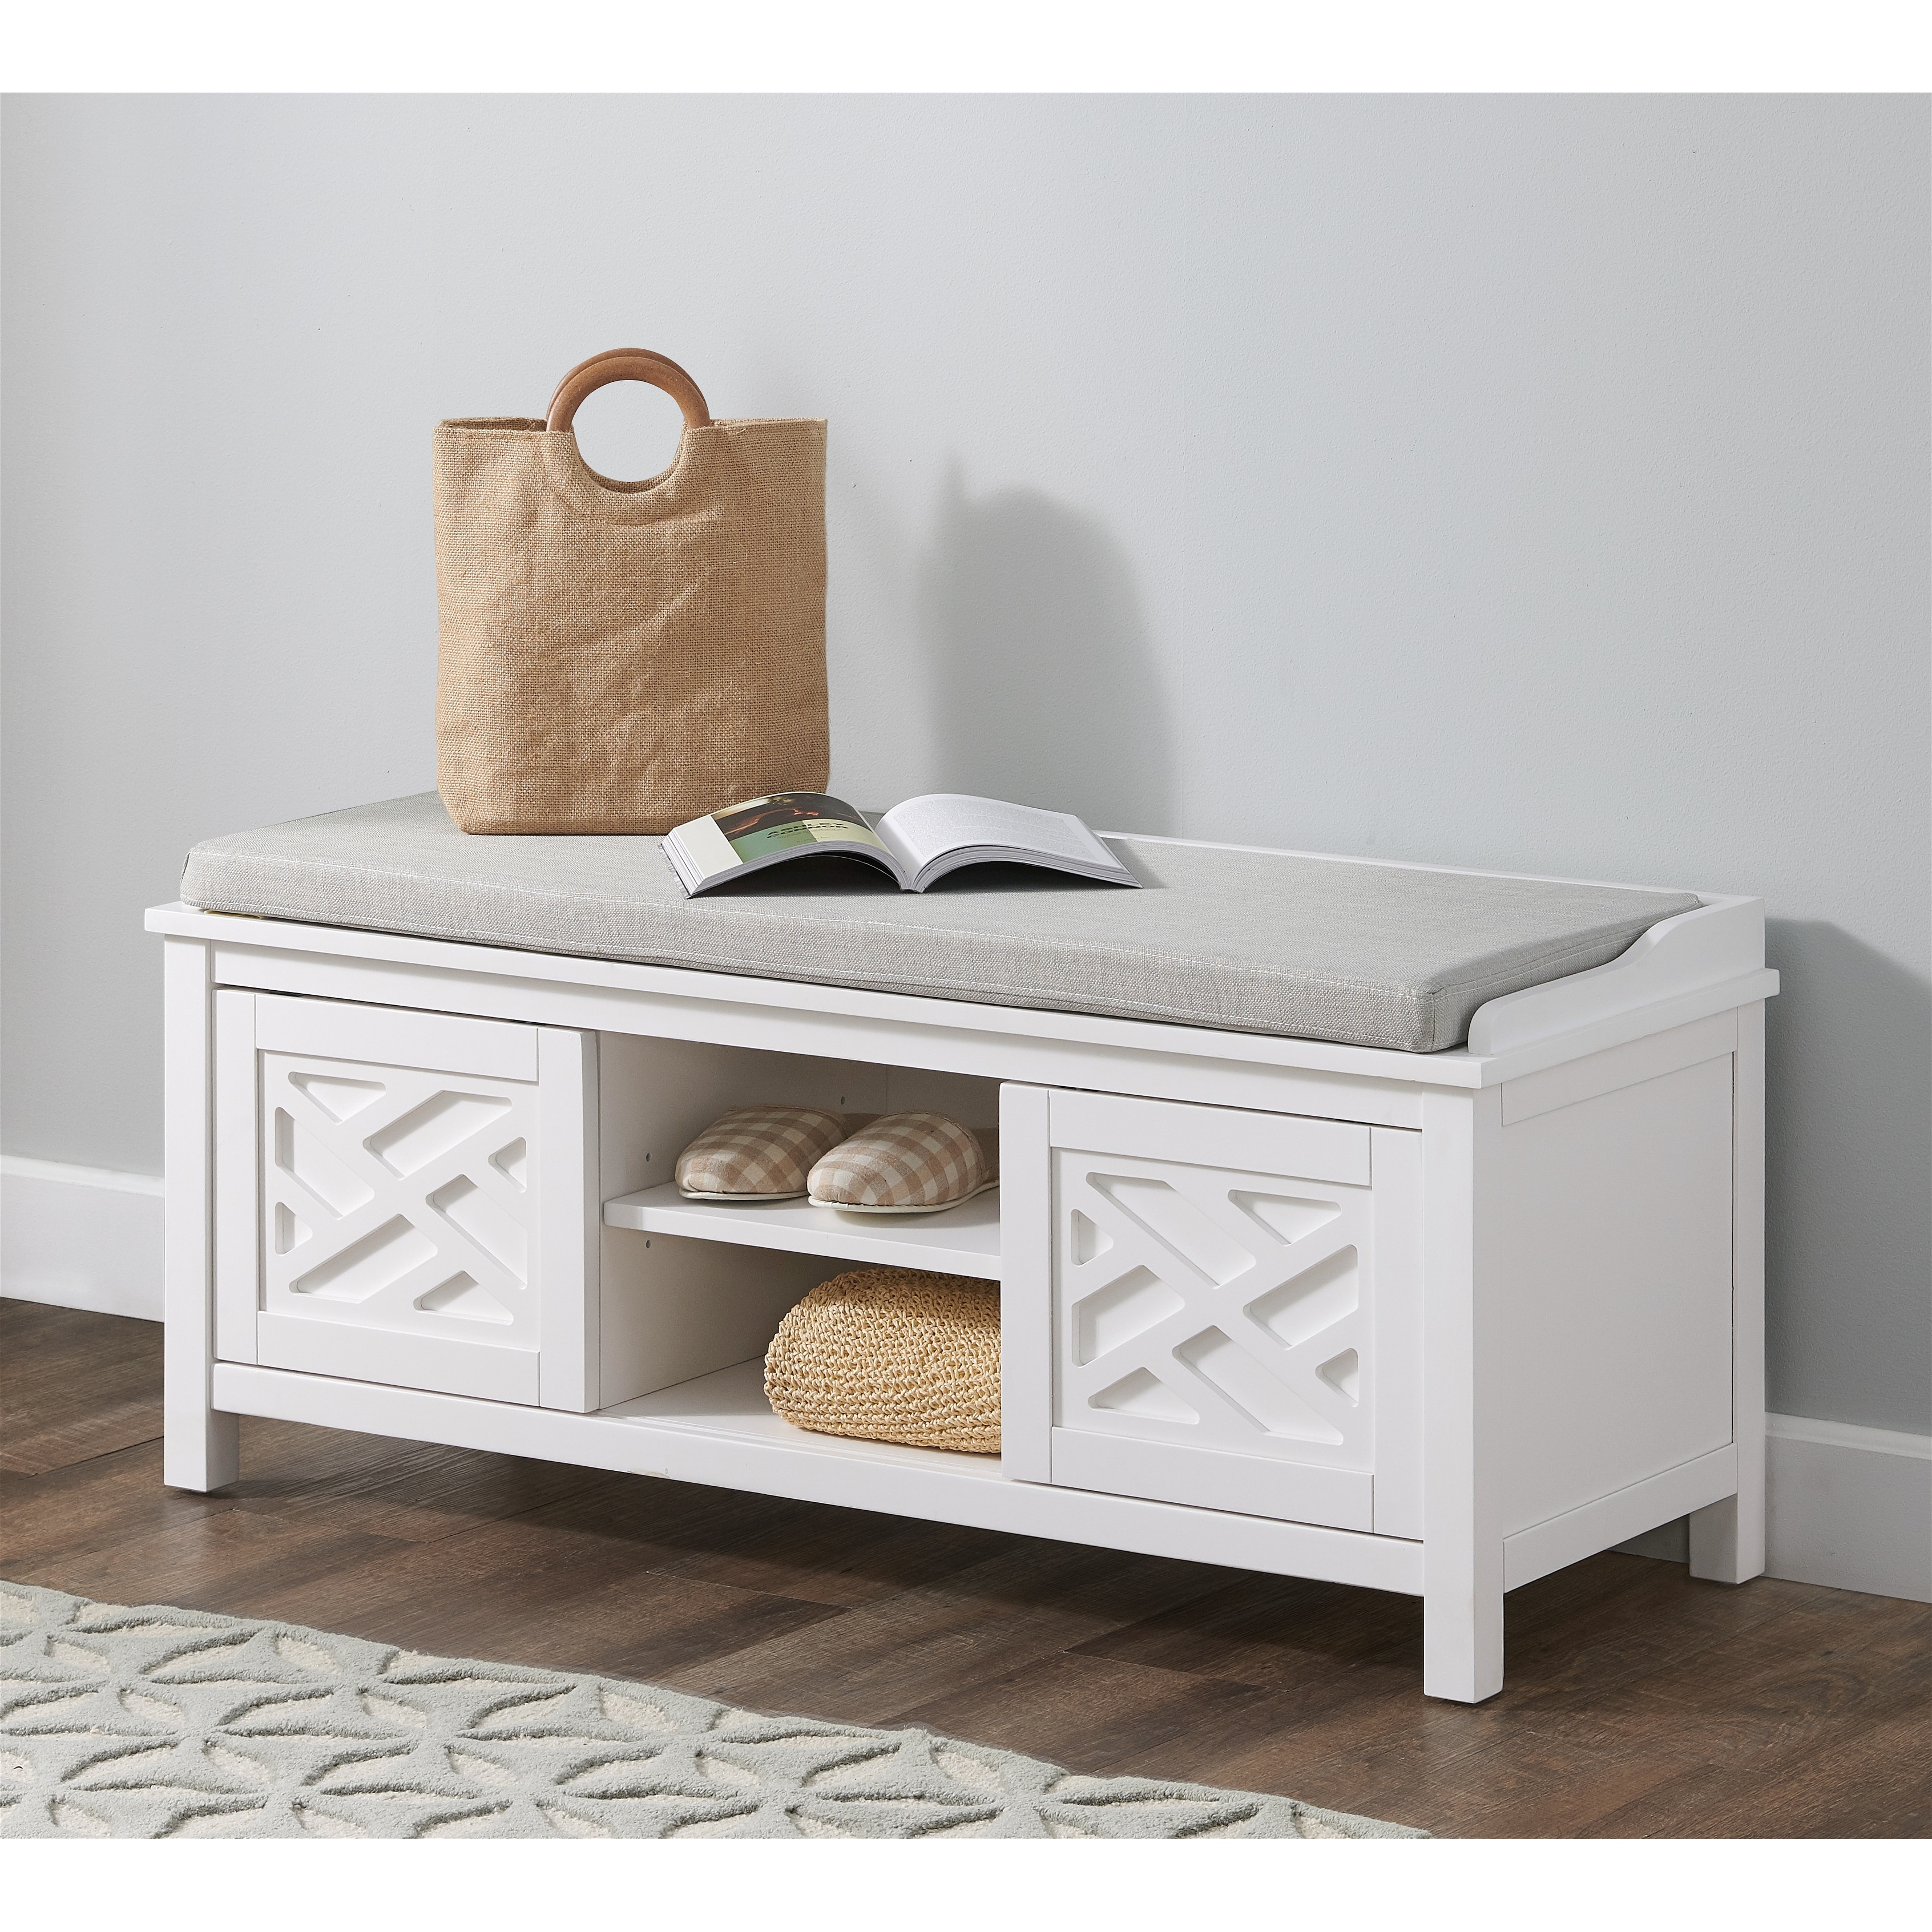 White Twin Seater Storage Bench Home Furniture w/ Drawers Wicker Baskets Cushion 